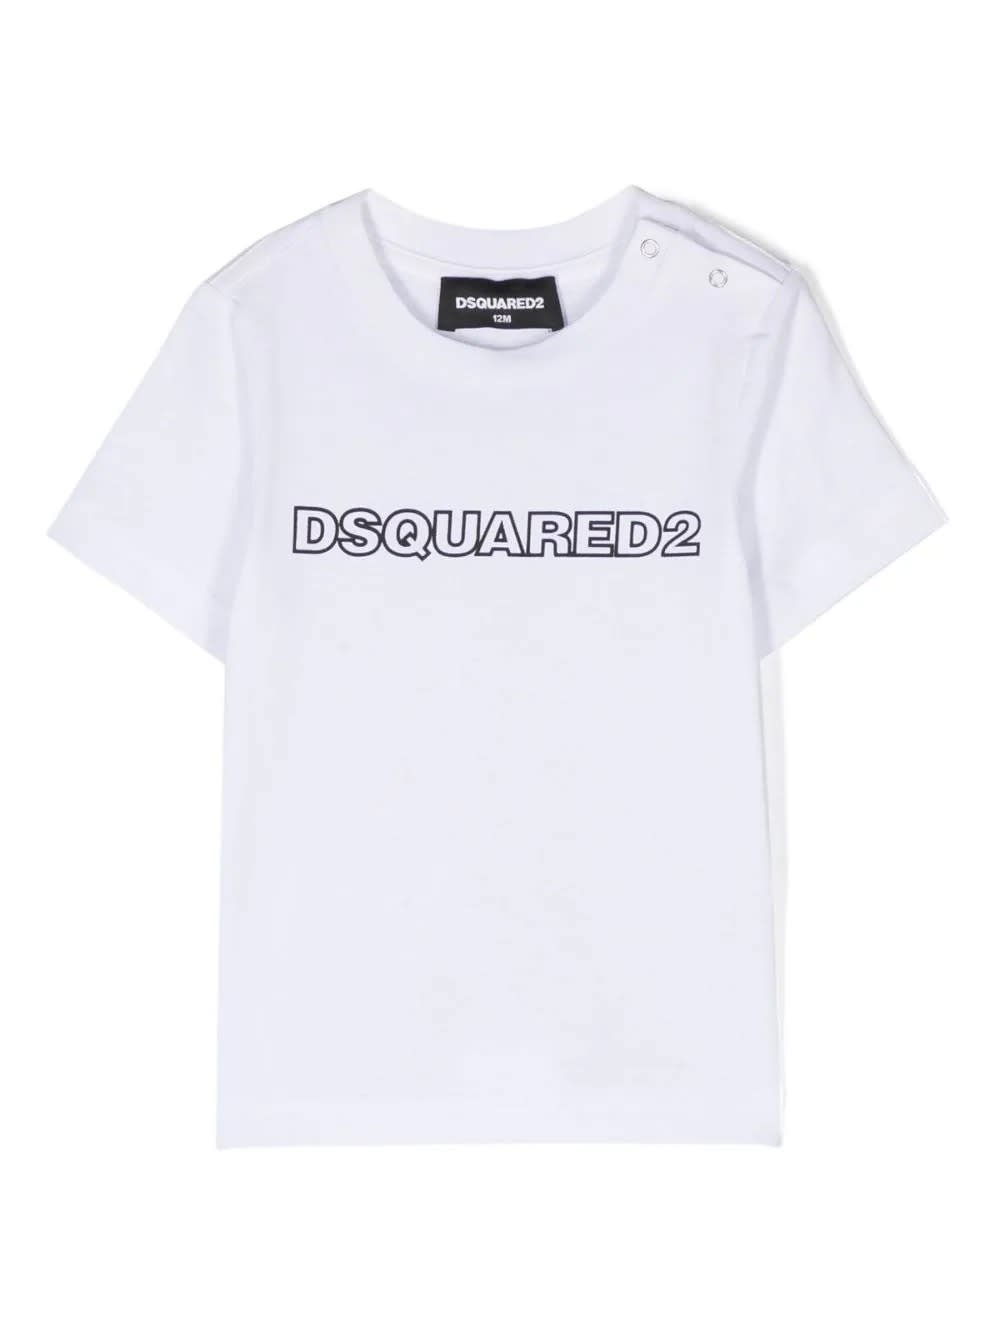 DSQUARED2 WHITE T-SHIRT WITH CONTRAST LOGO